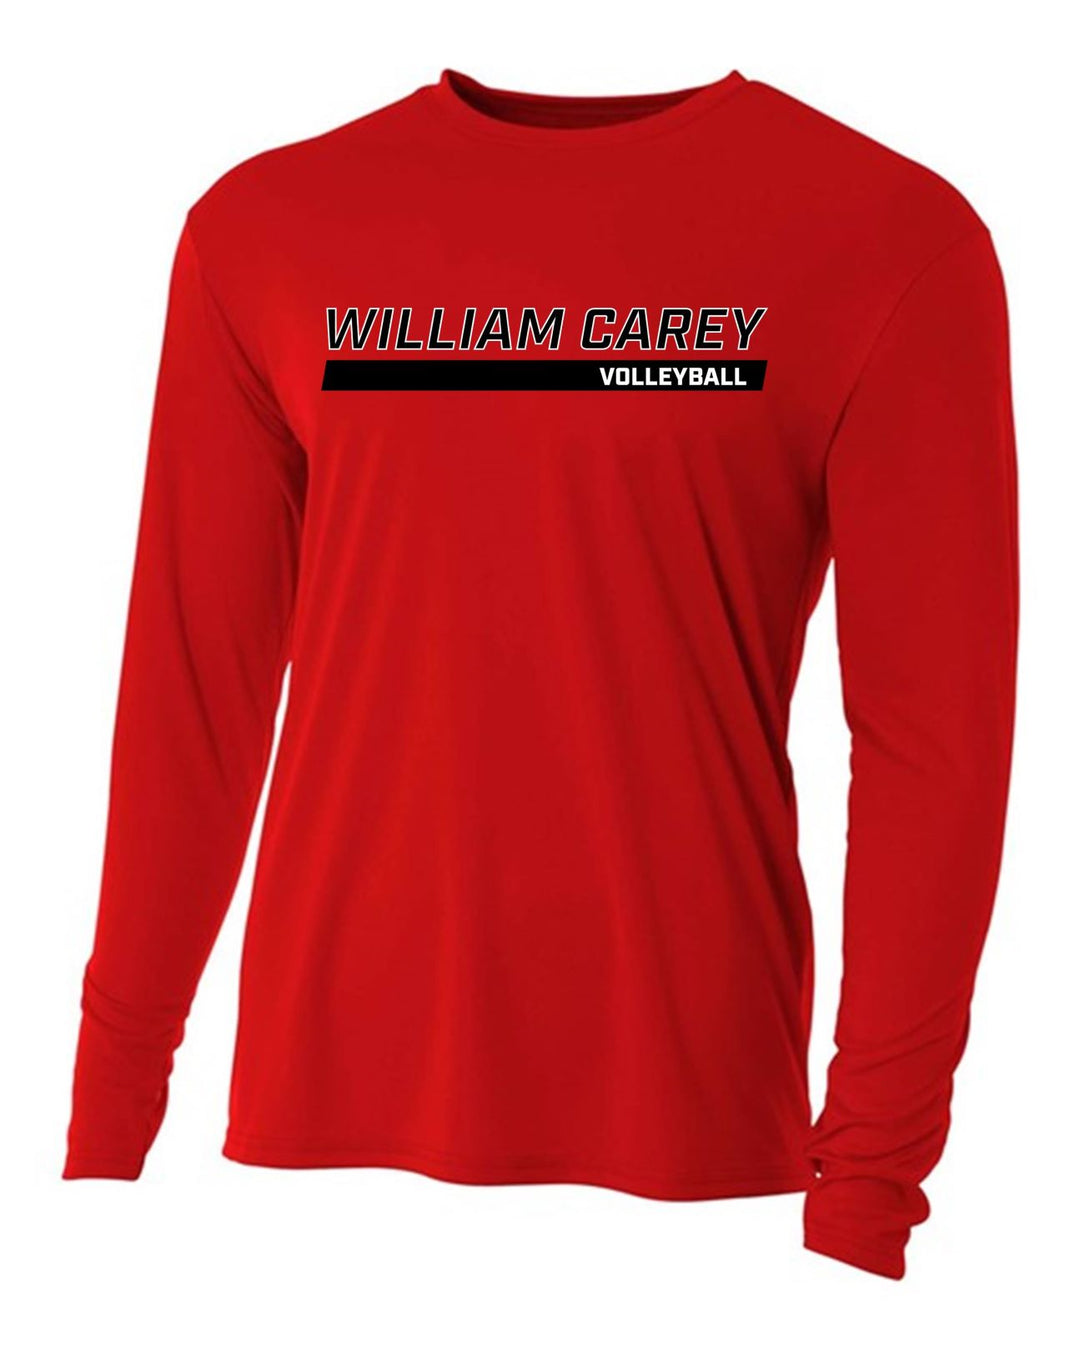 WCU Volleyball Men's Long-Sleeve Performance Shirt WCU Volleyball Red WC W/O CRUSADER - Third Coast Soccer